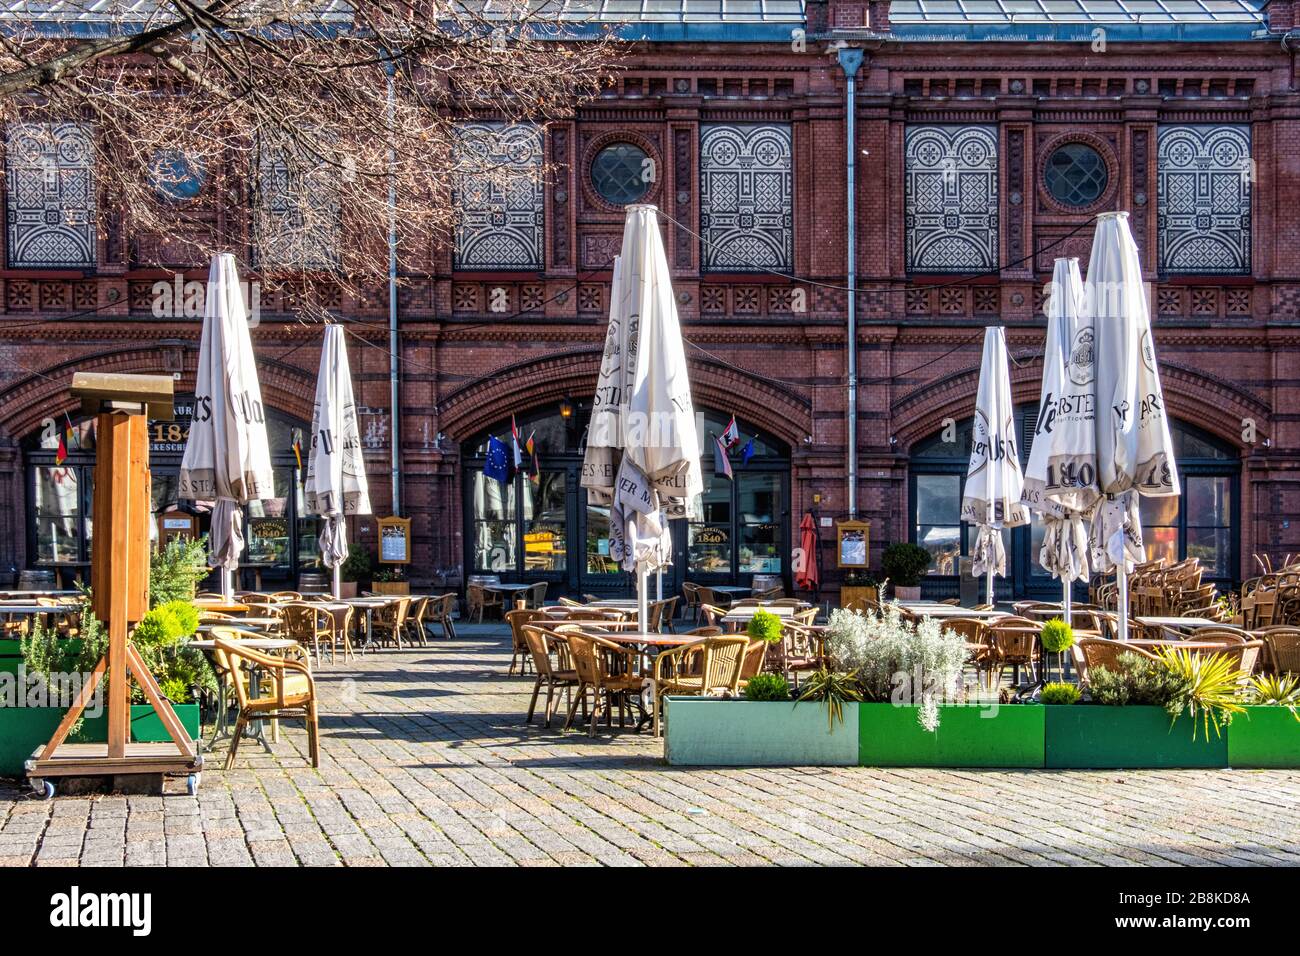 Restaurants, bars and cafes next to the Hackescher Market ralway station closed due to Coronovirus Pandemic, Mitte, Berlin, Germany Stock Photo